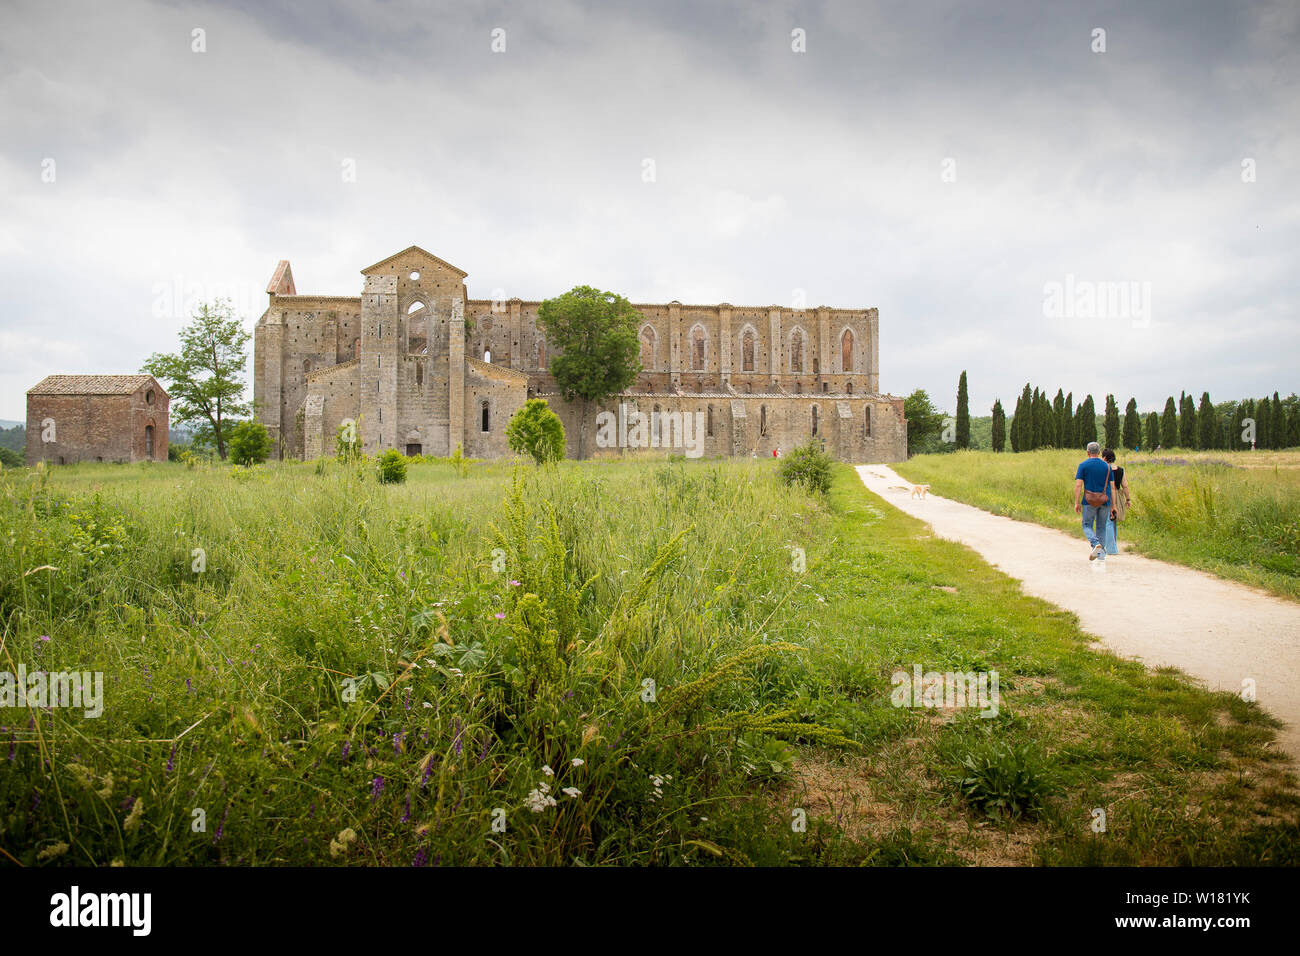 View of san galgano abbey from outside with two people walking towards the abbey. People are not recognizable.Tuscany, Italy. Stock Photo